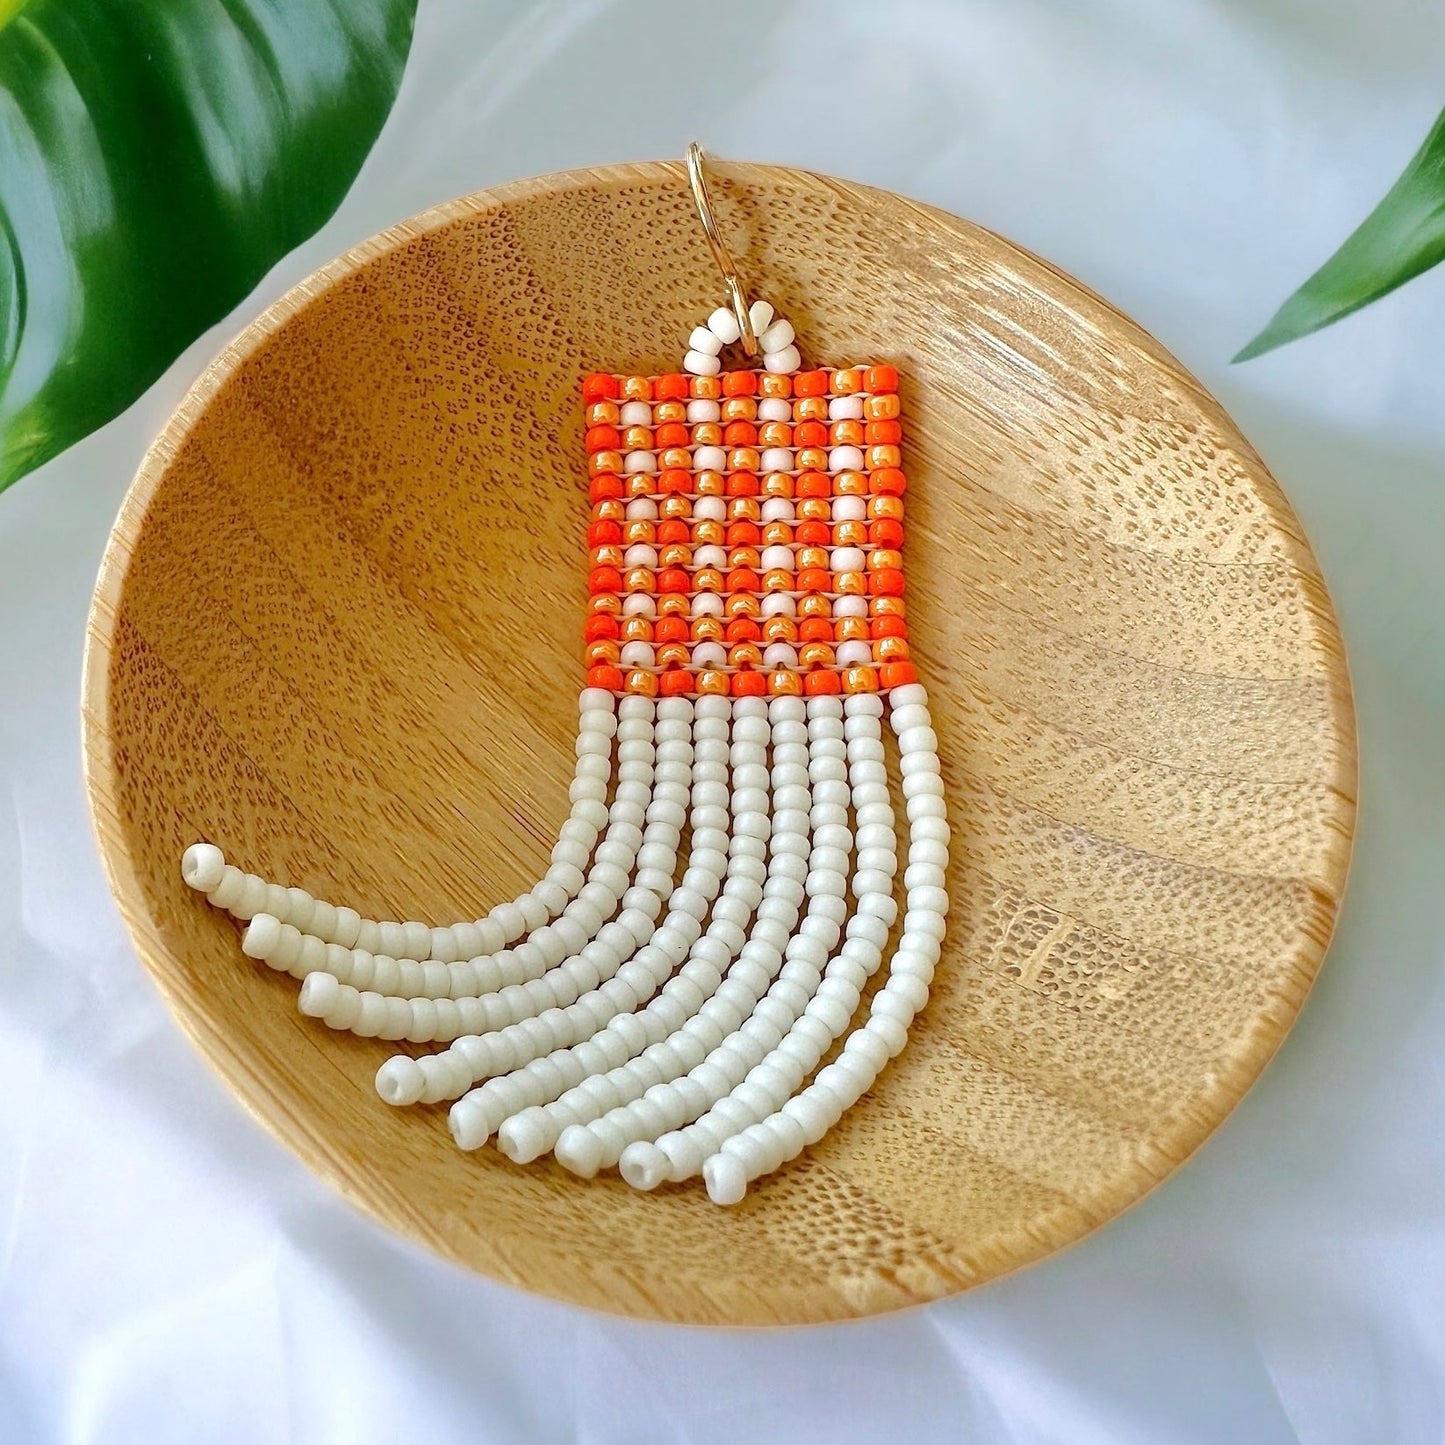 A beaded fringe earring with an orange gingham pattern in a wooden dish on a white cloth